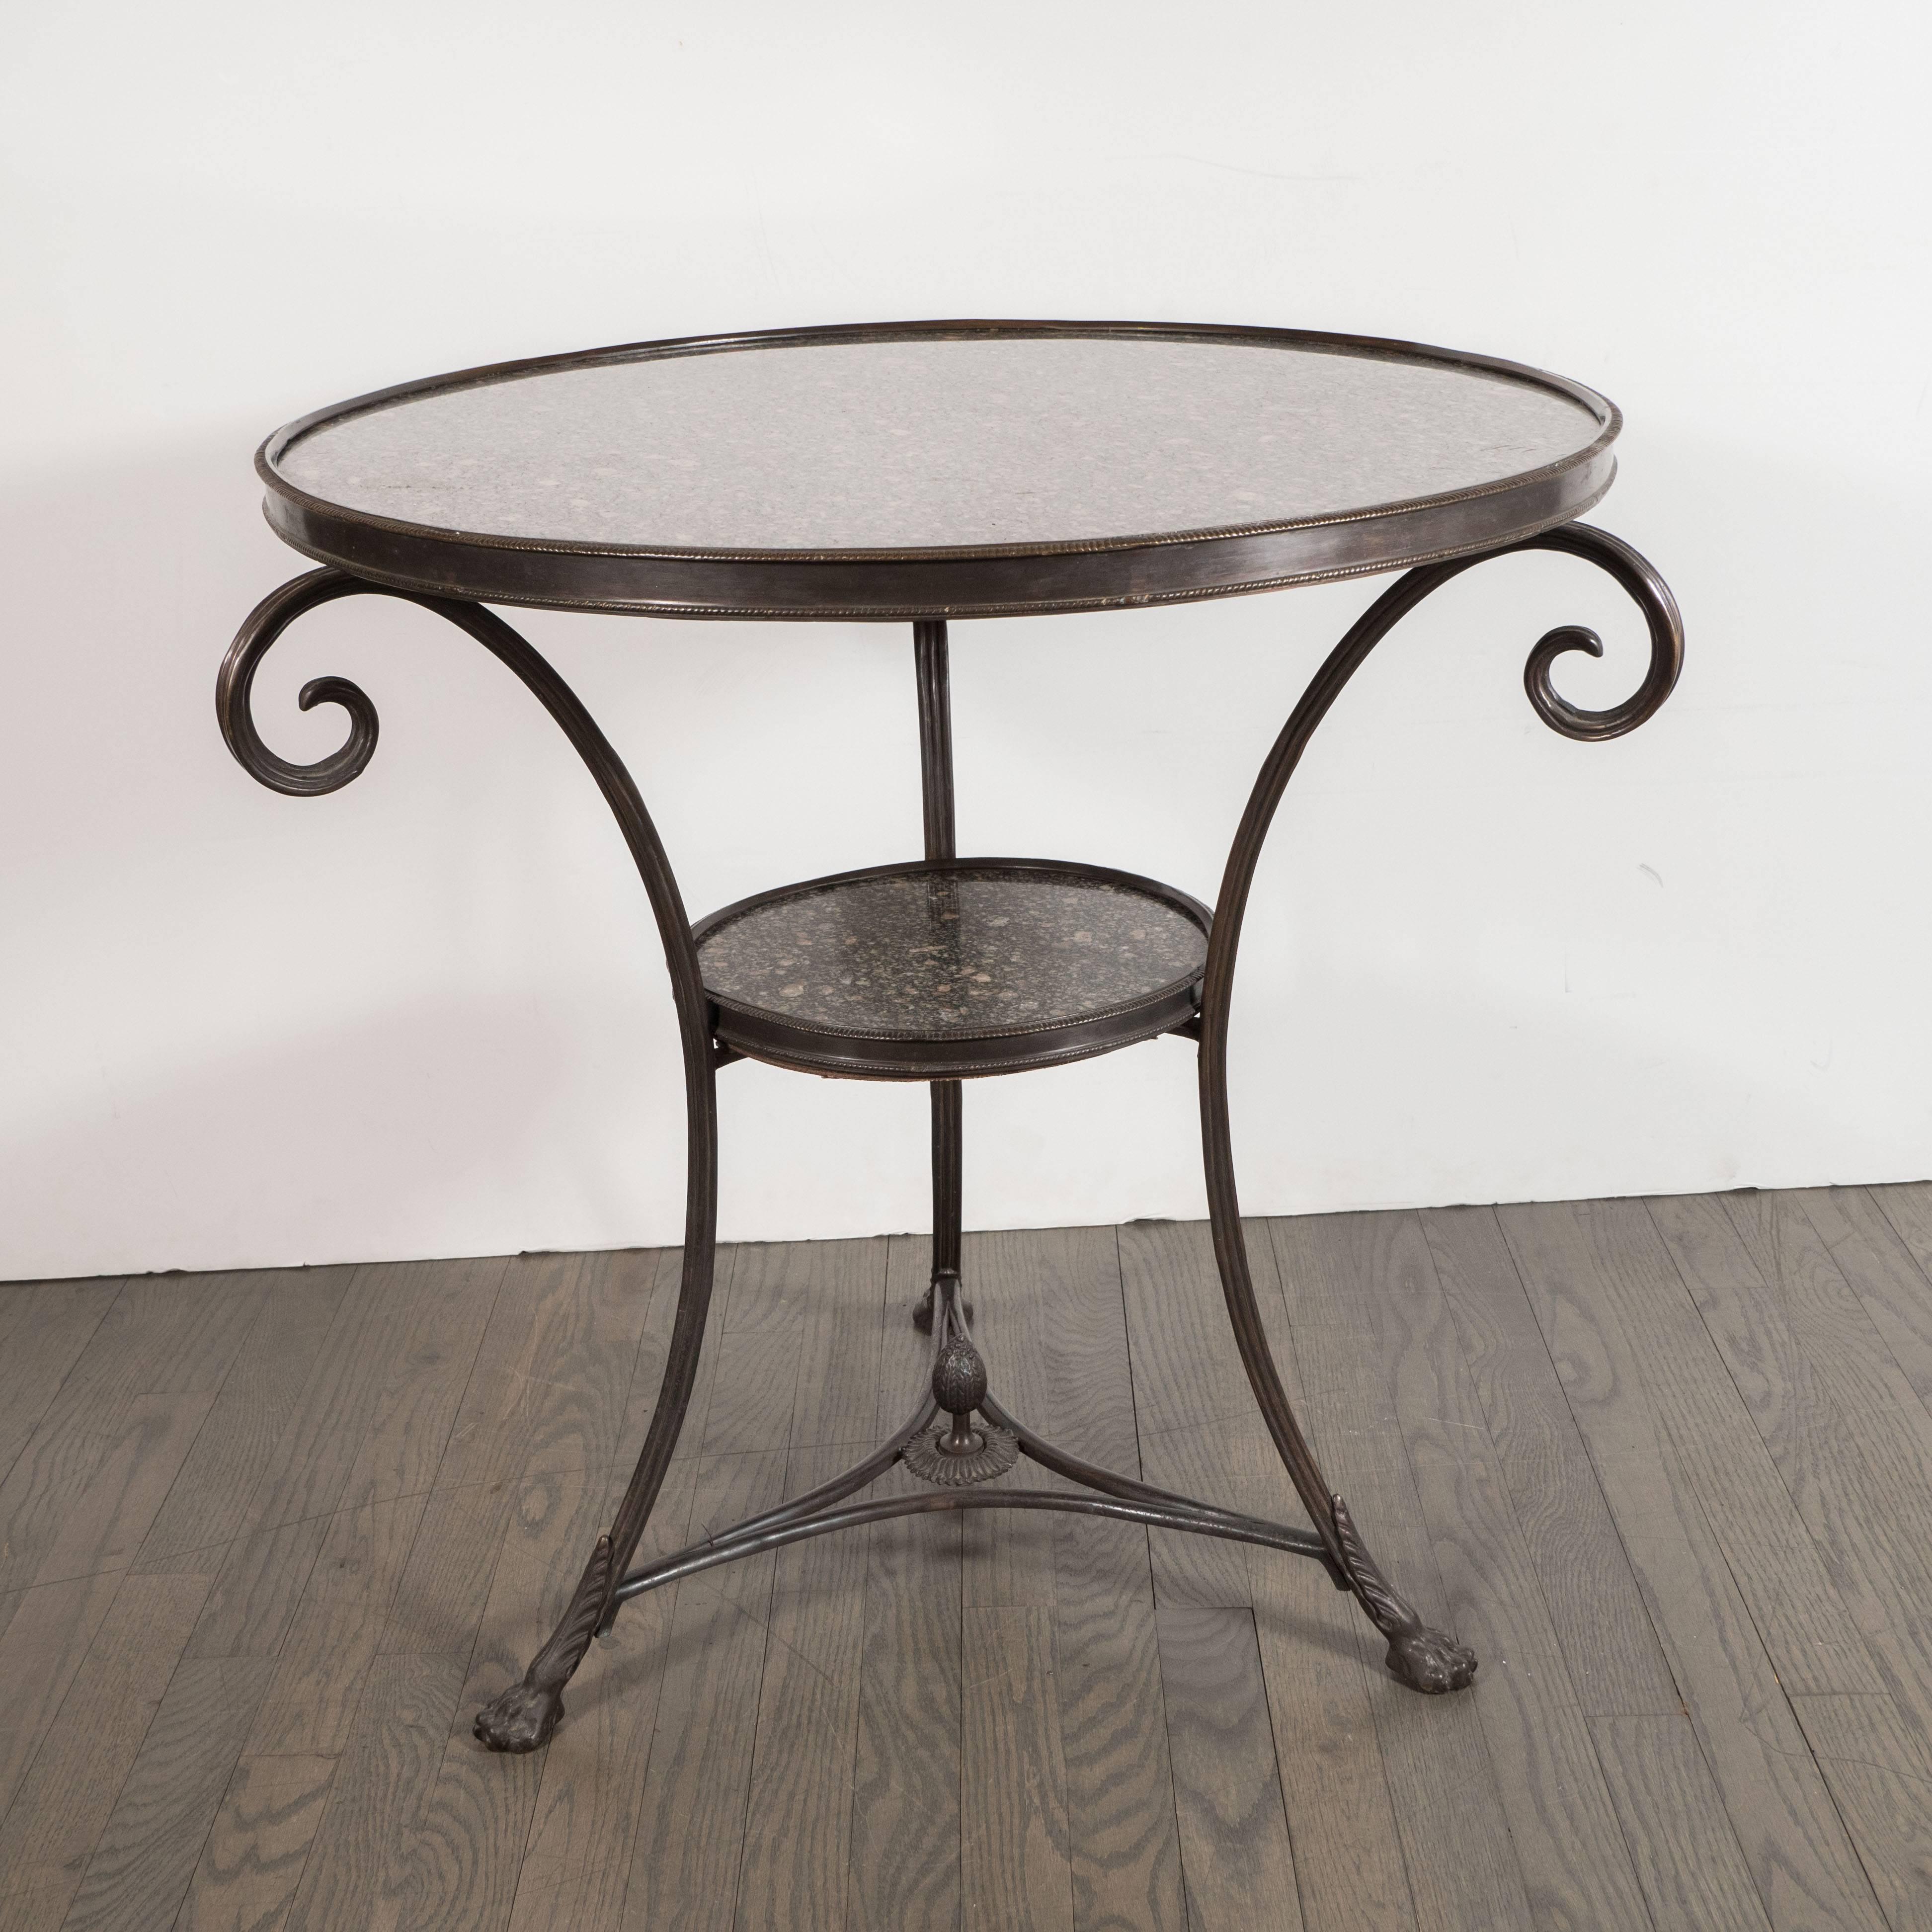 This dramatic and refined pair of Art Deco gueridon tables were realized in France, circa 1930. They feature two tiers of round granite tops circumscribed by bronze which is inscribed throughout with vertical striations. They are supported by